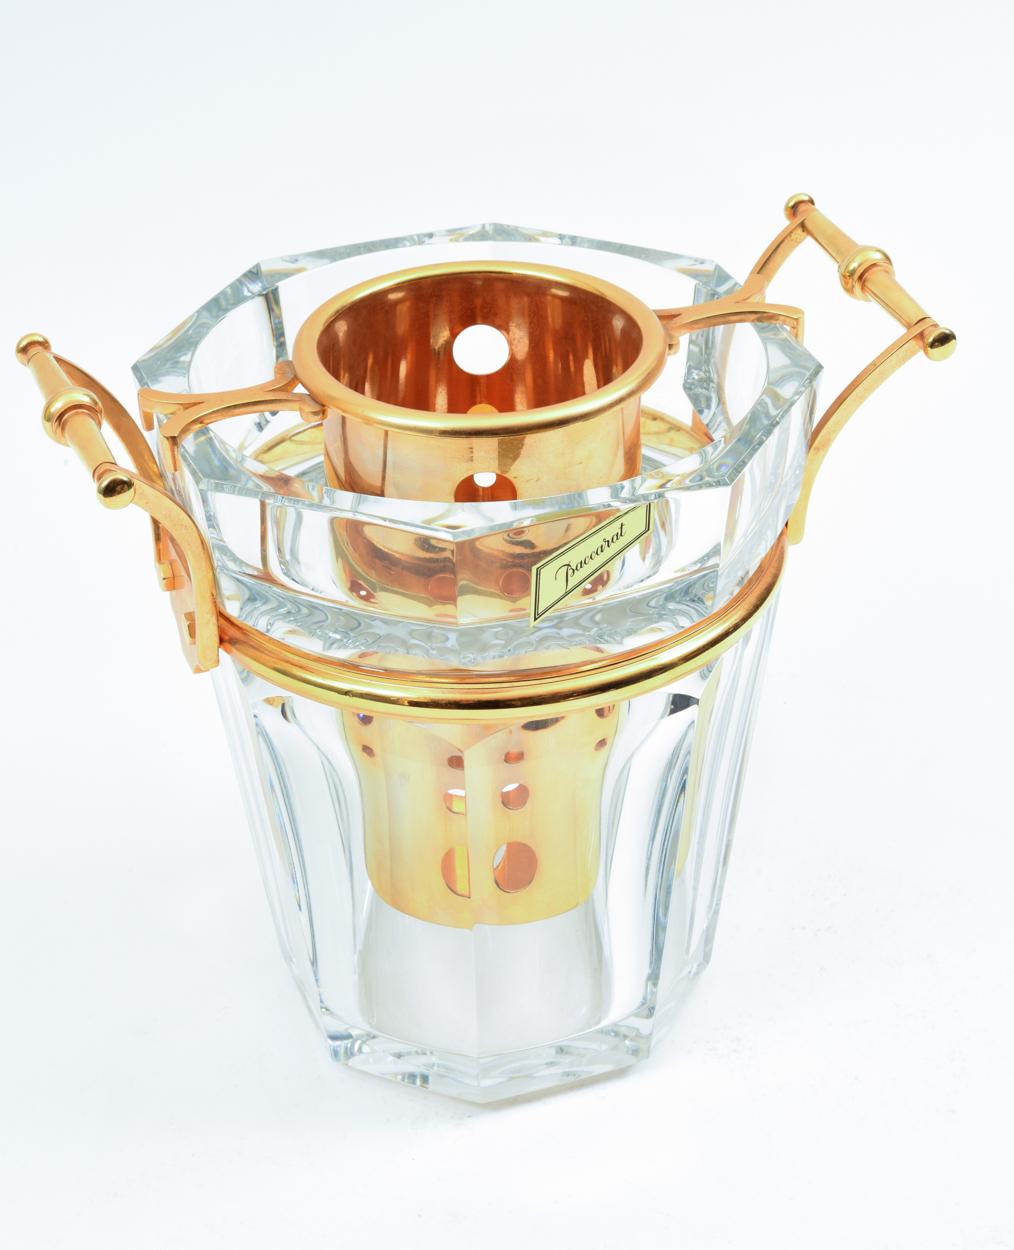 Beautiful Baccarat crystal Champagne / wine cooler bucket, with gilded bronze mounted fittings bottle holder and sides handle. The cooler is in excellent condition. Maker's mark undersigned on each piece. The cooler stand about 10.5 inches diameter